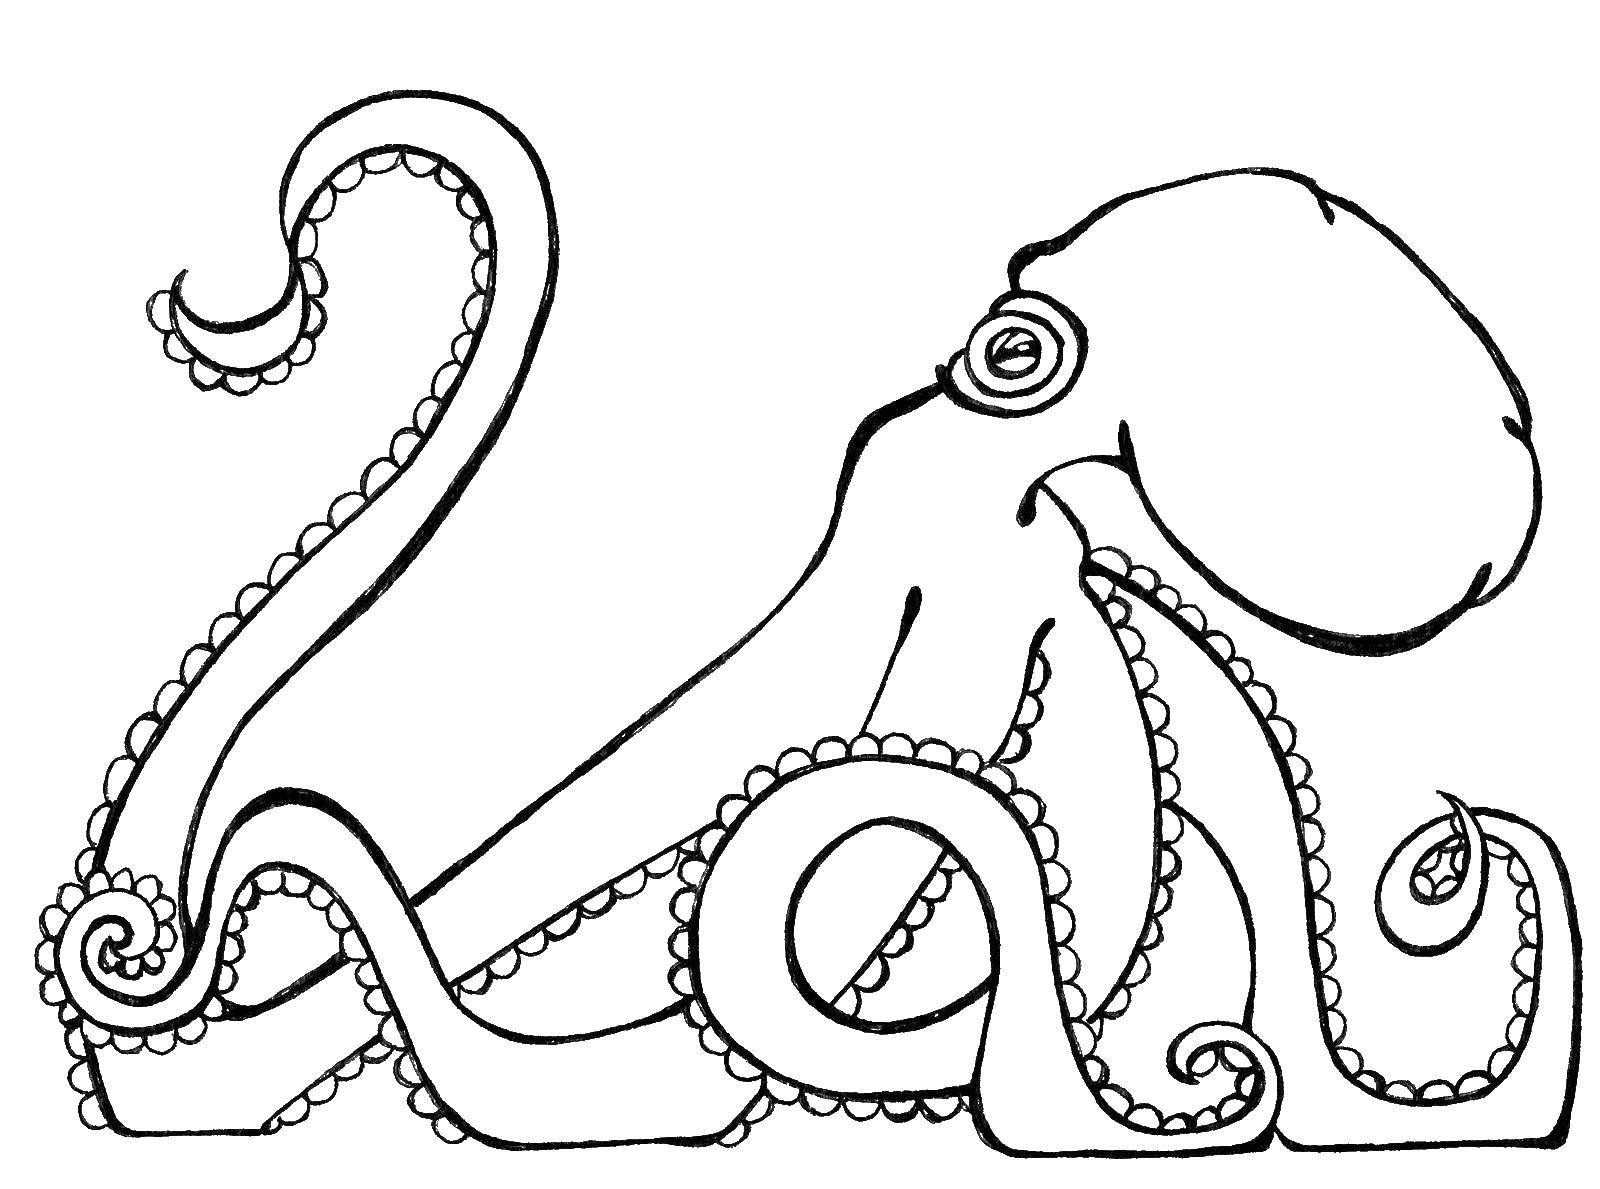 Coloring Smart octopus. Category Marine animals. Tags:  Underwater world, octopus.